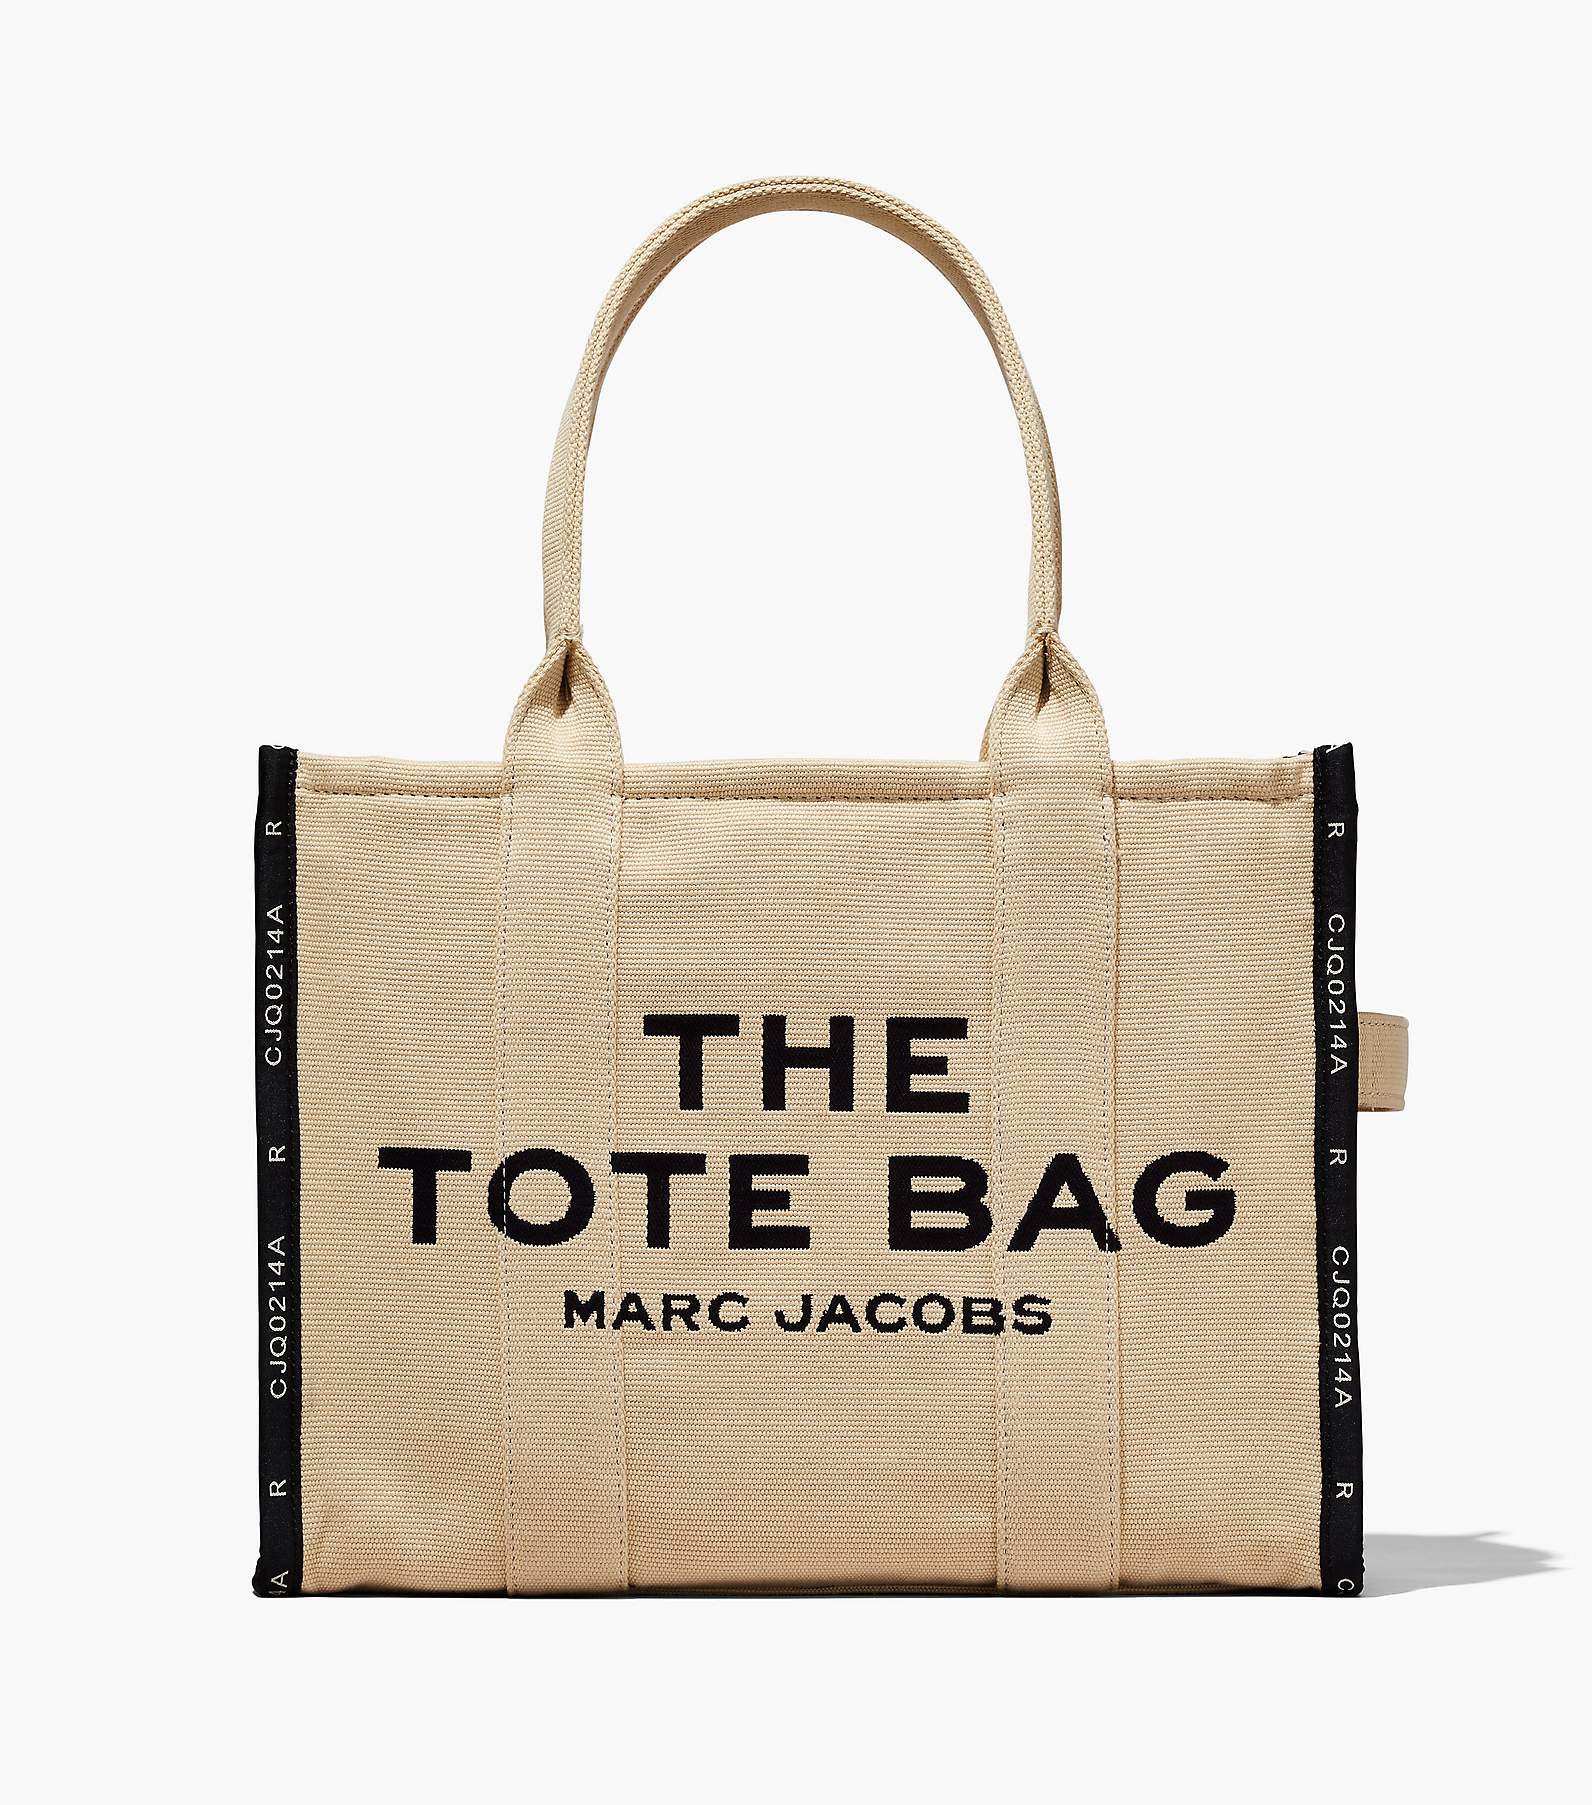 The Only Marc Jacobs Tote Bag Review You Need To Read - CLOSS FASHION